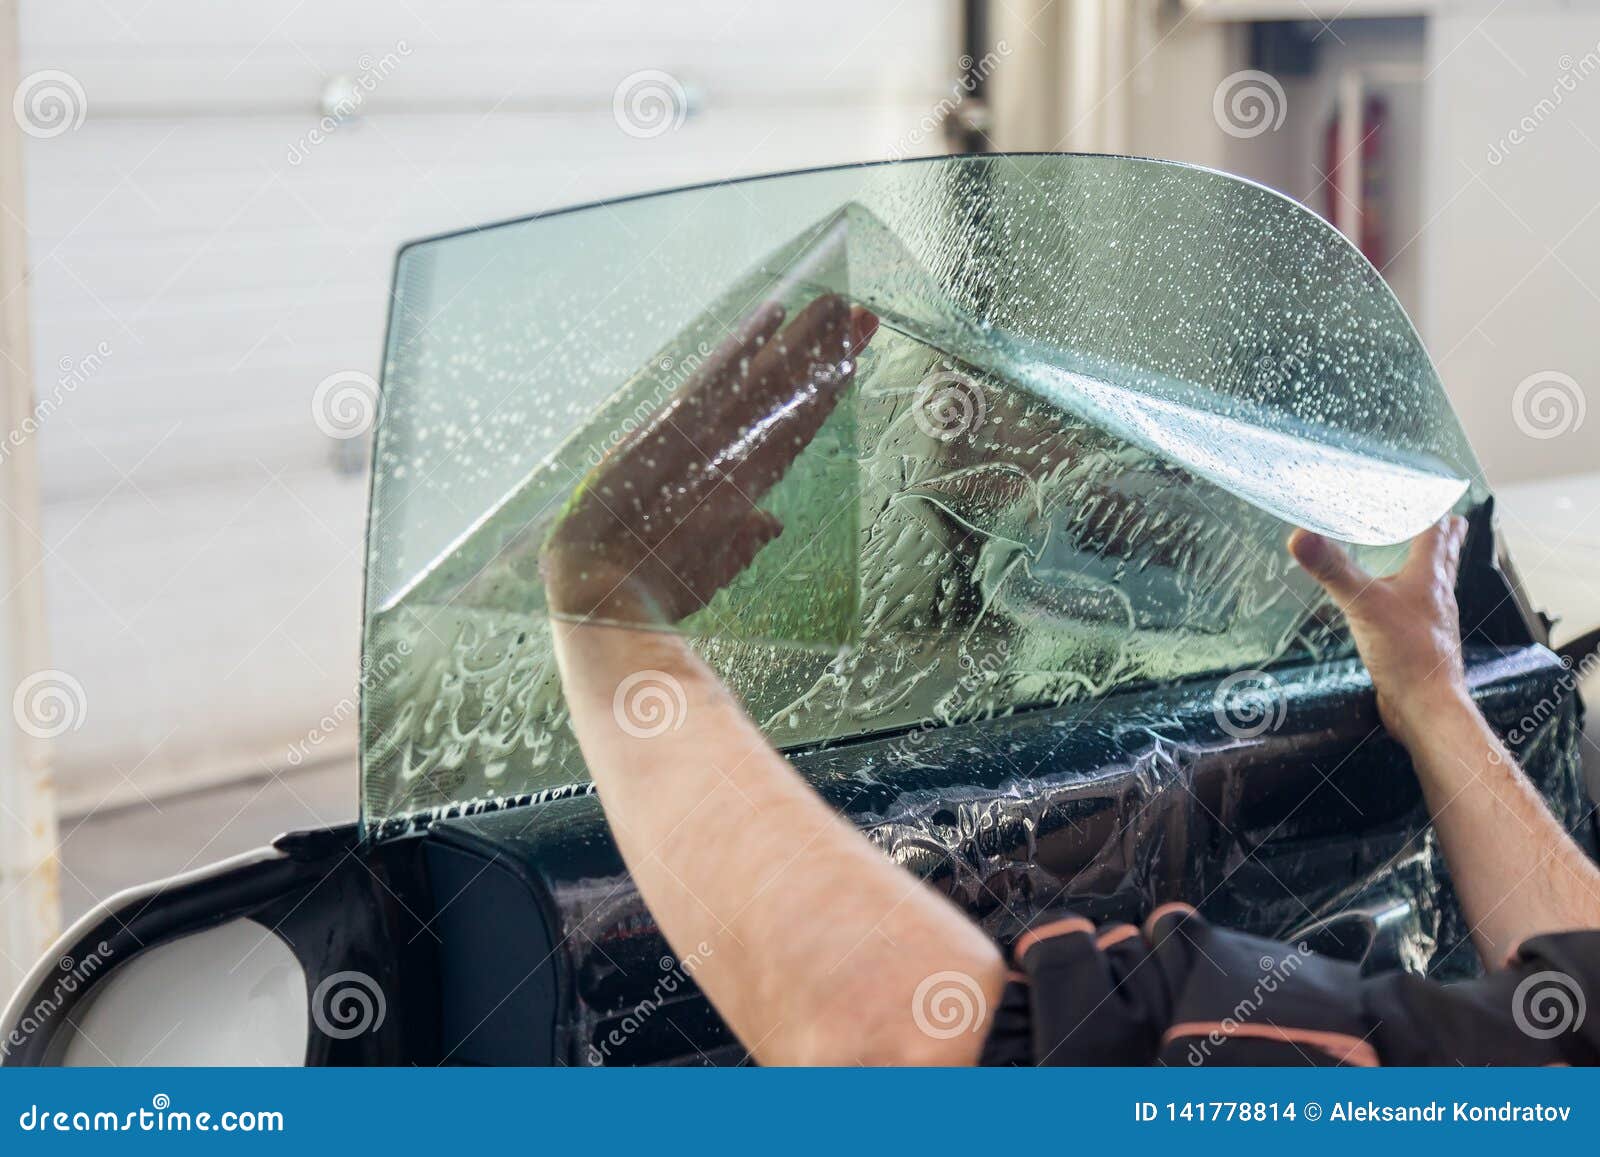 the wizard for installing additional equipment sticks a tint film on the side front glass of the car and flattens it by hand to